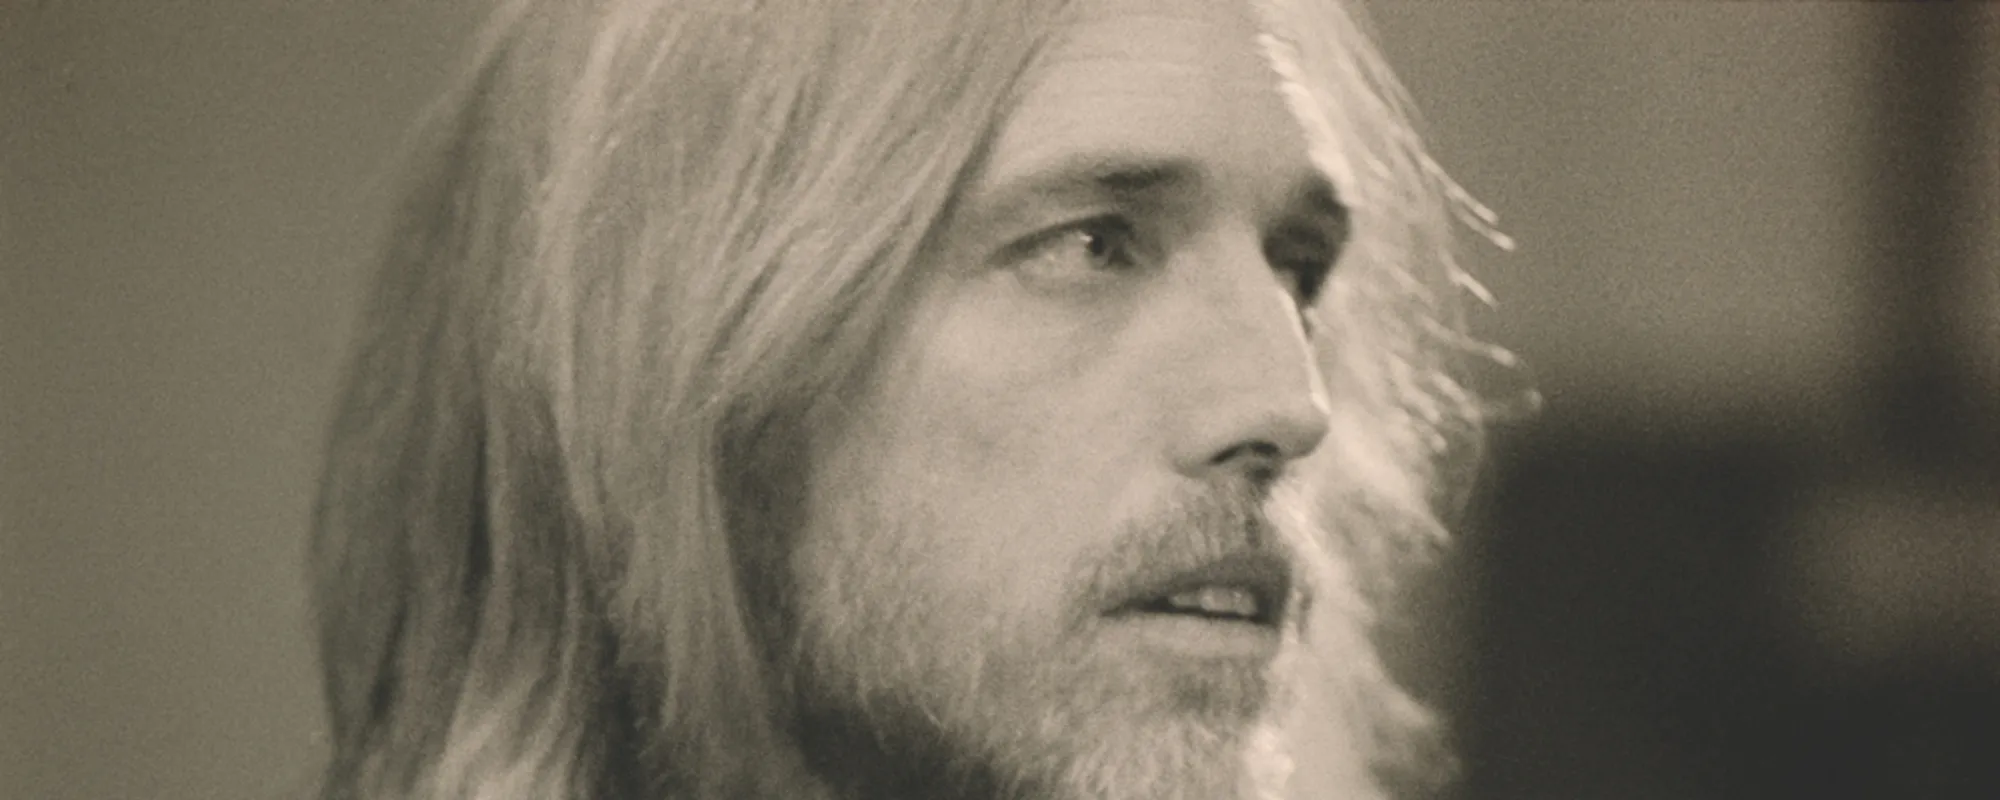 The Meaning Behind the Song: “I Won’t Back Down” by Tom Petty